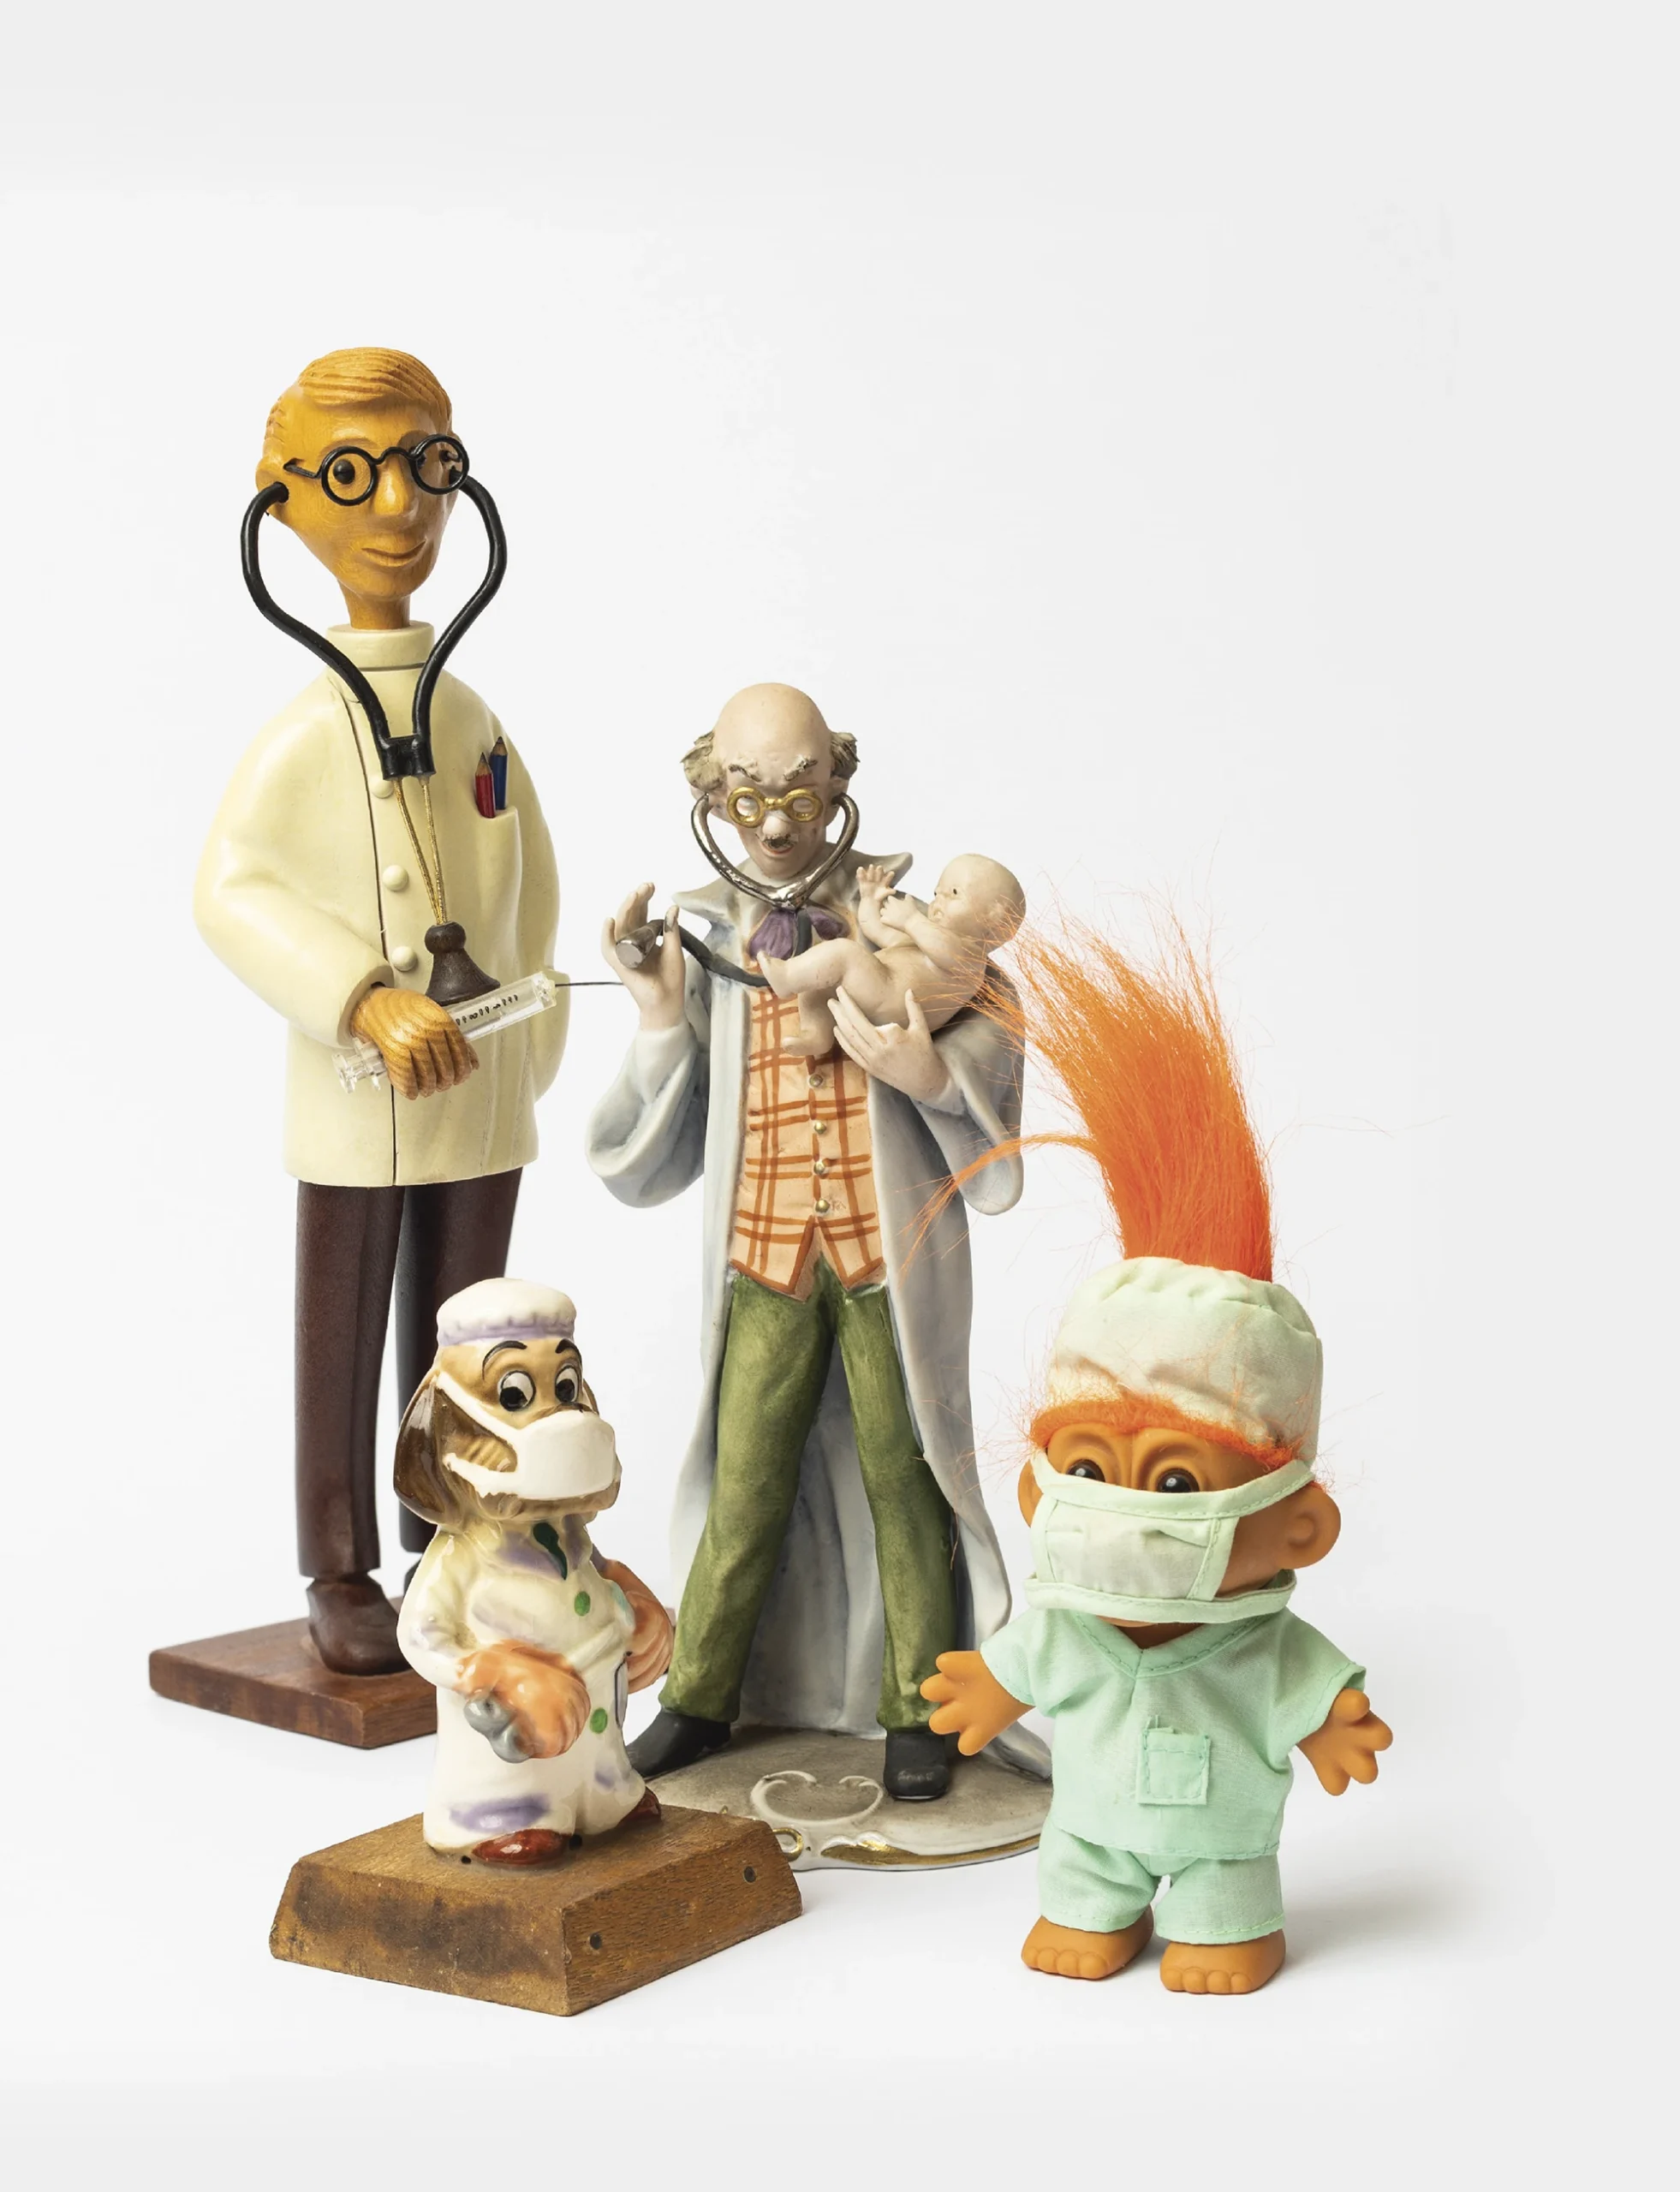 Array of different doctor figurines, like a troll, a dog, a doctor holding a baby and another doctor